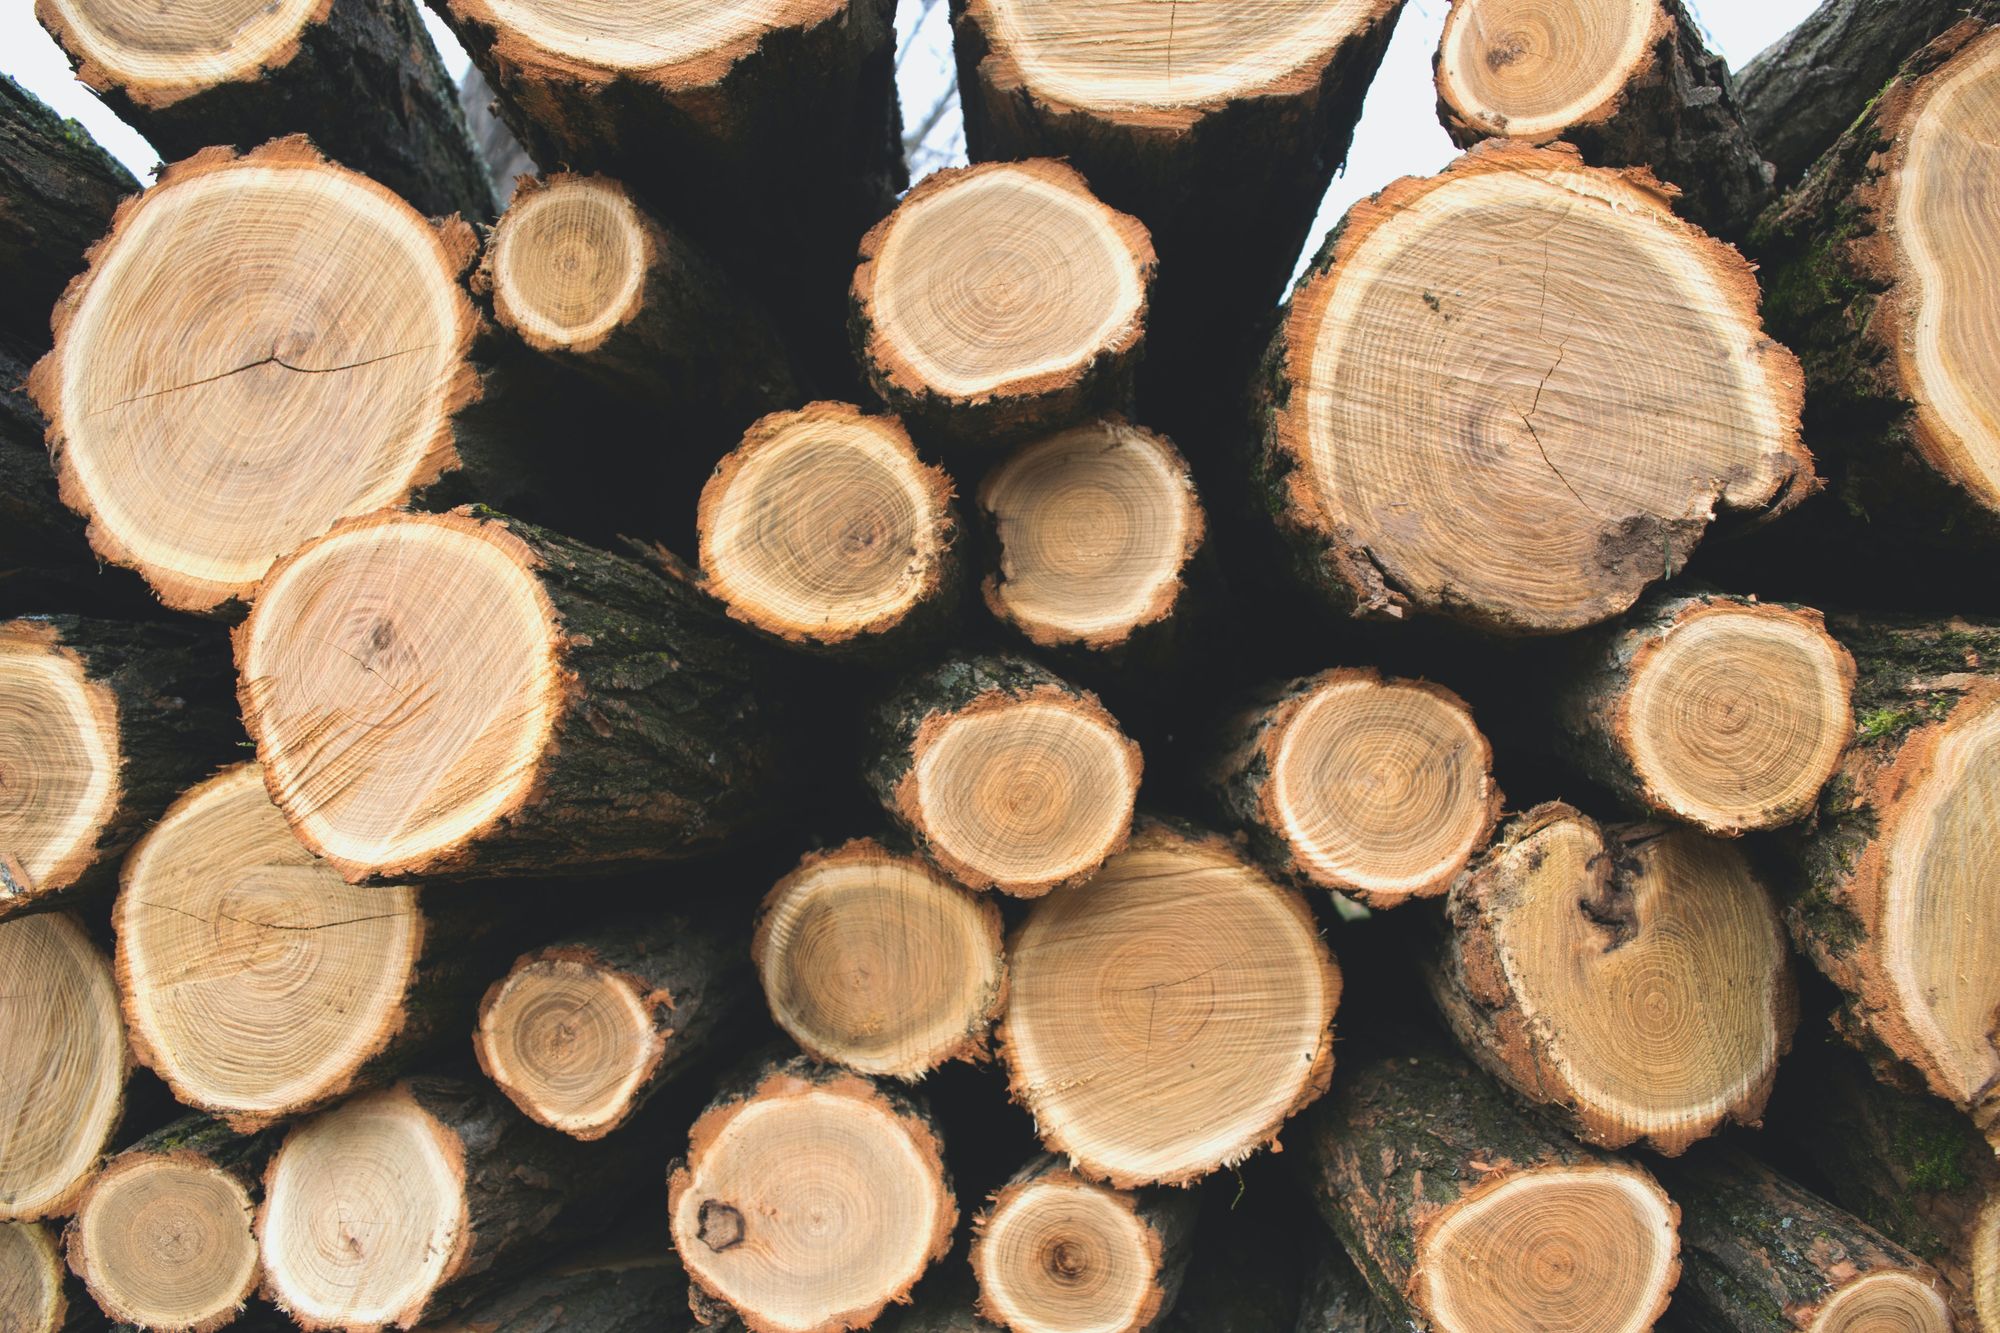 How to Select the Best Ingredients for Wood Production